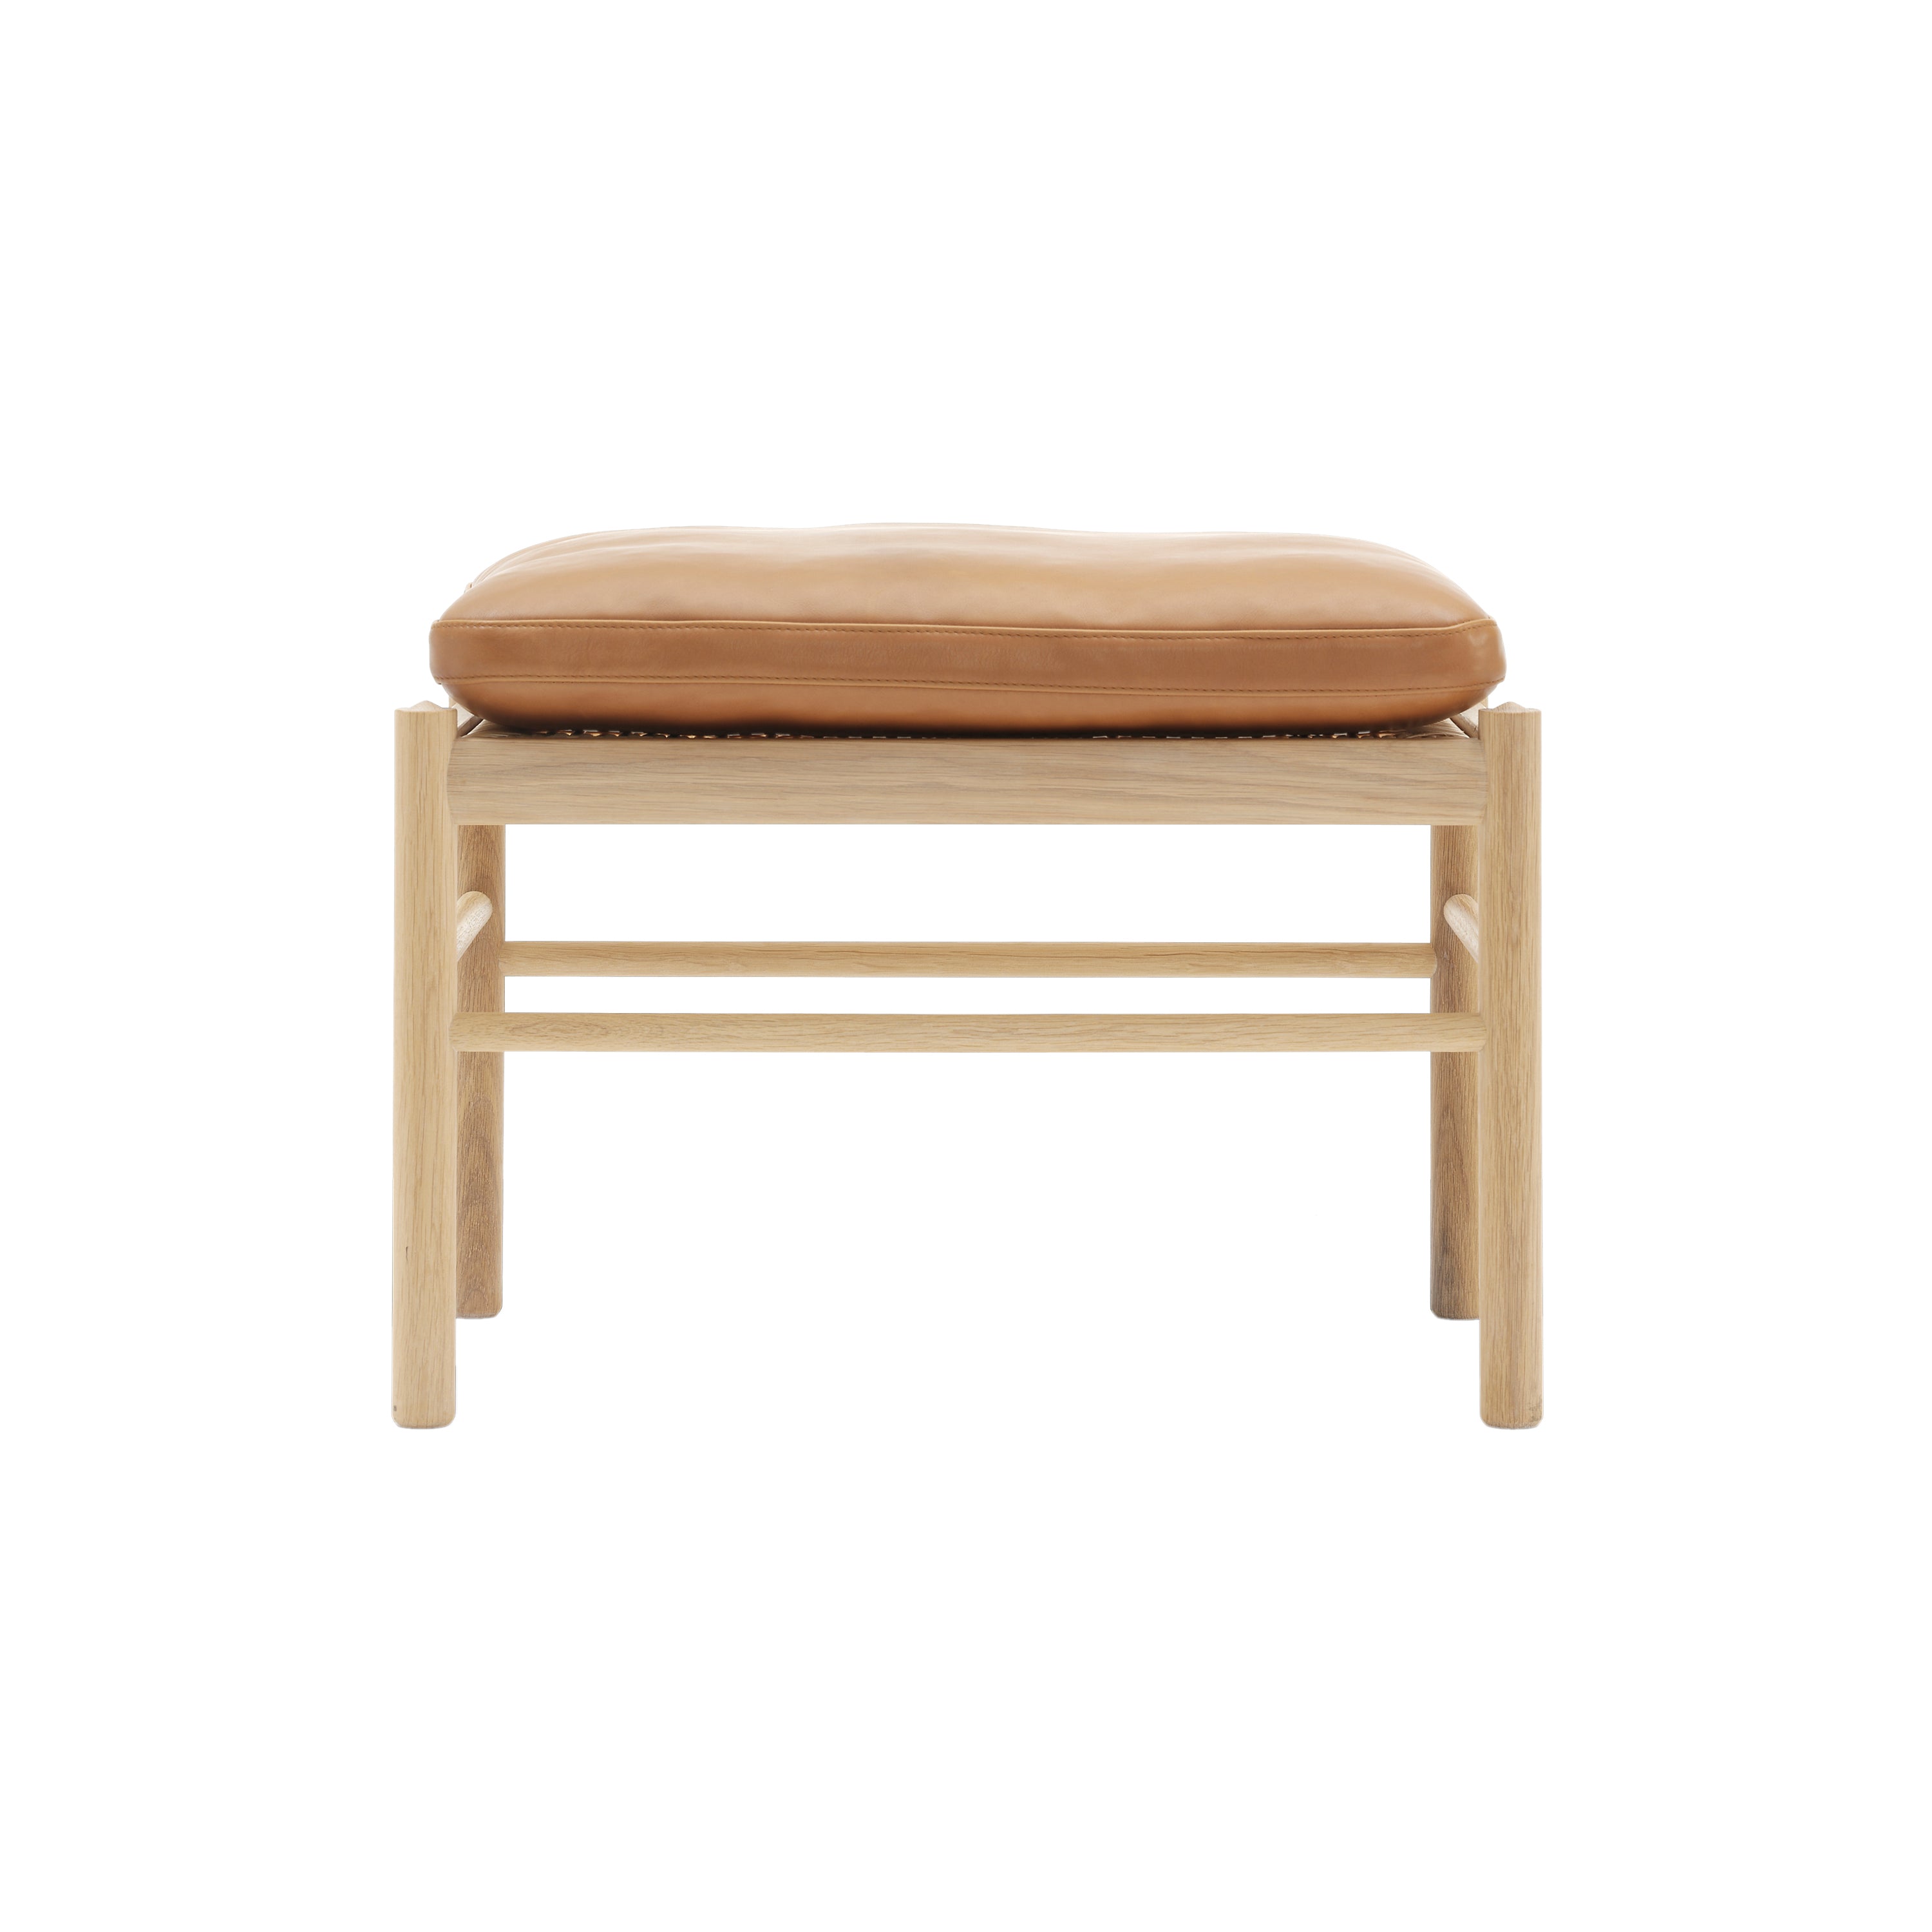 OW149F Colonial Footstool: Soaped Oak